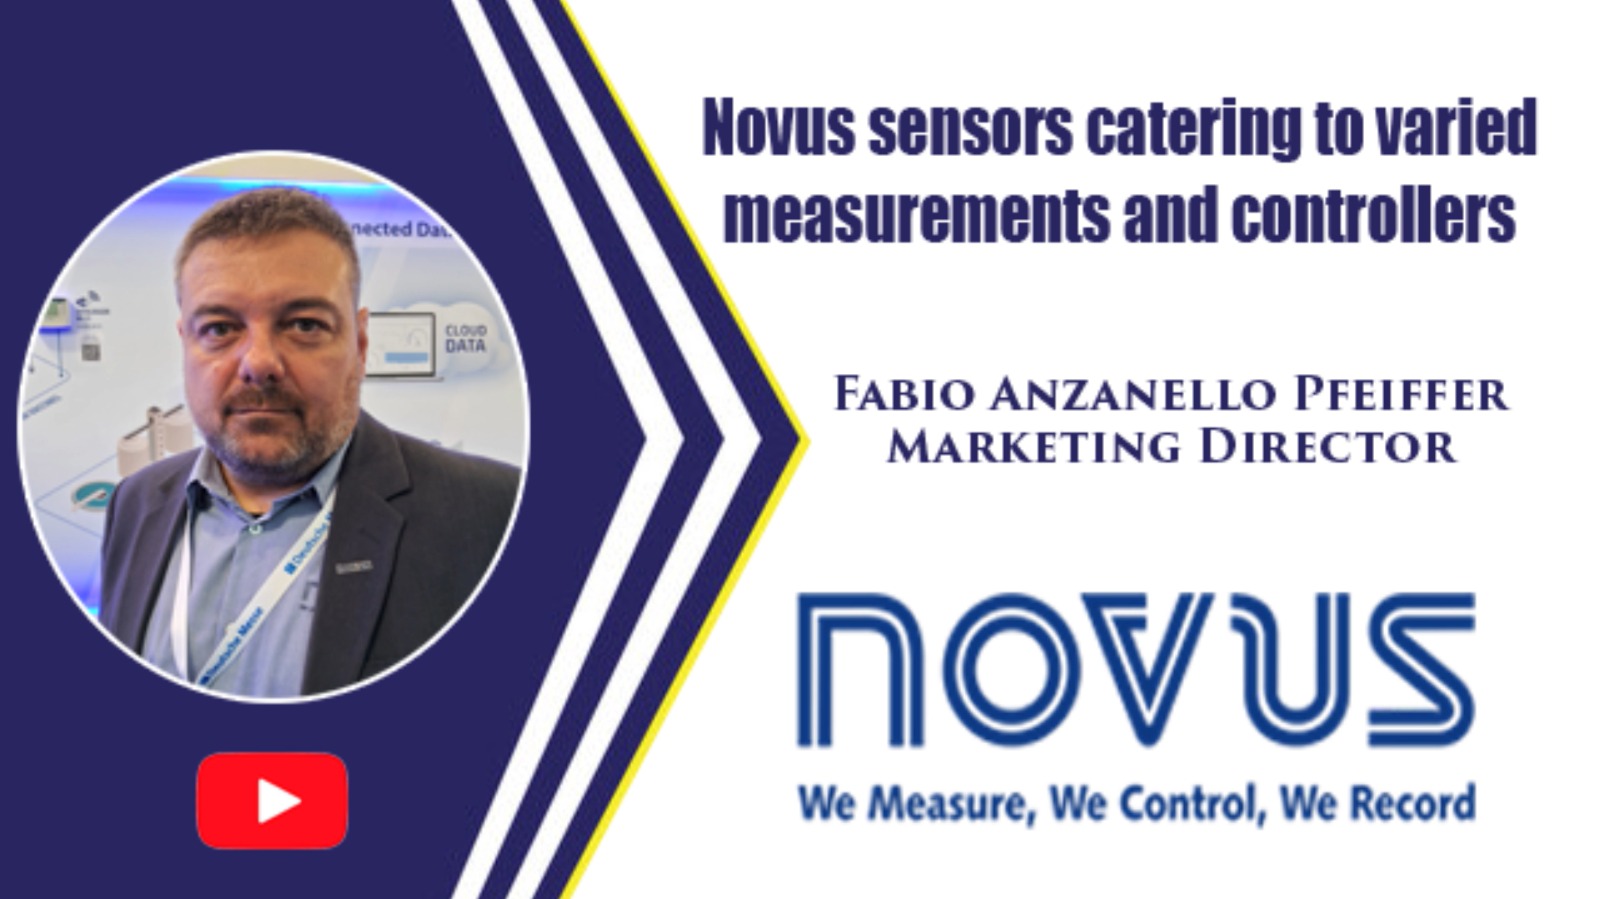 Novus sensors catering to varied measurements and controllers | Hannover Messe | OEM Update Magazine